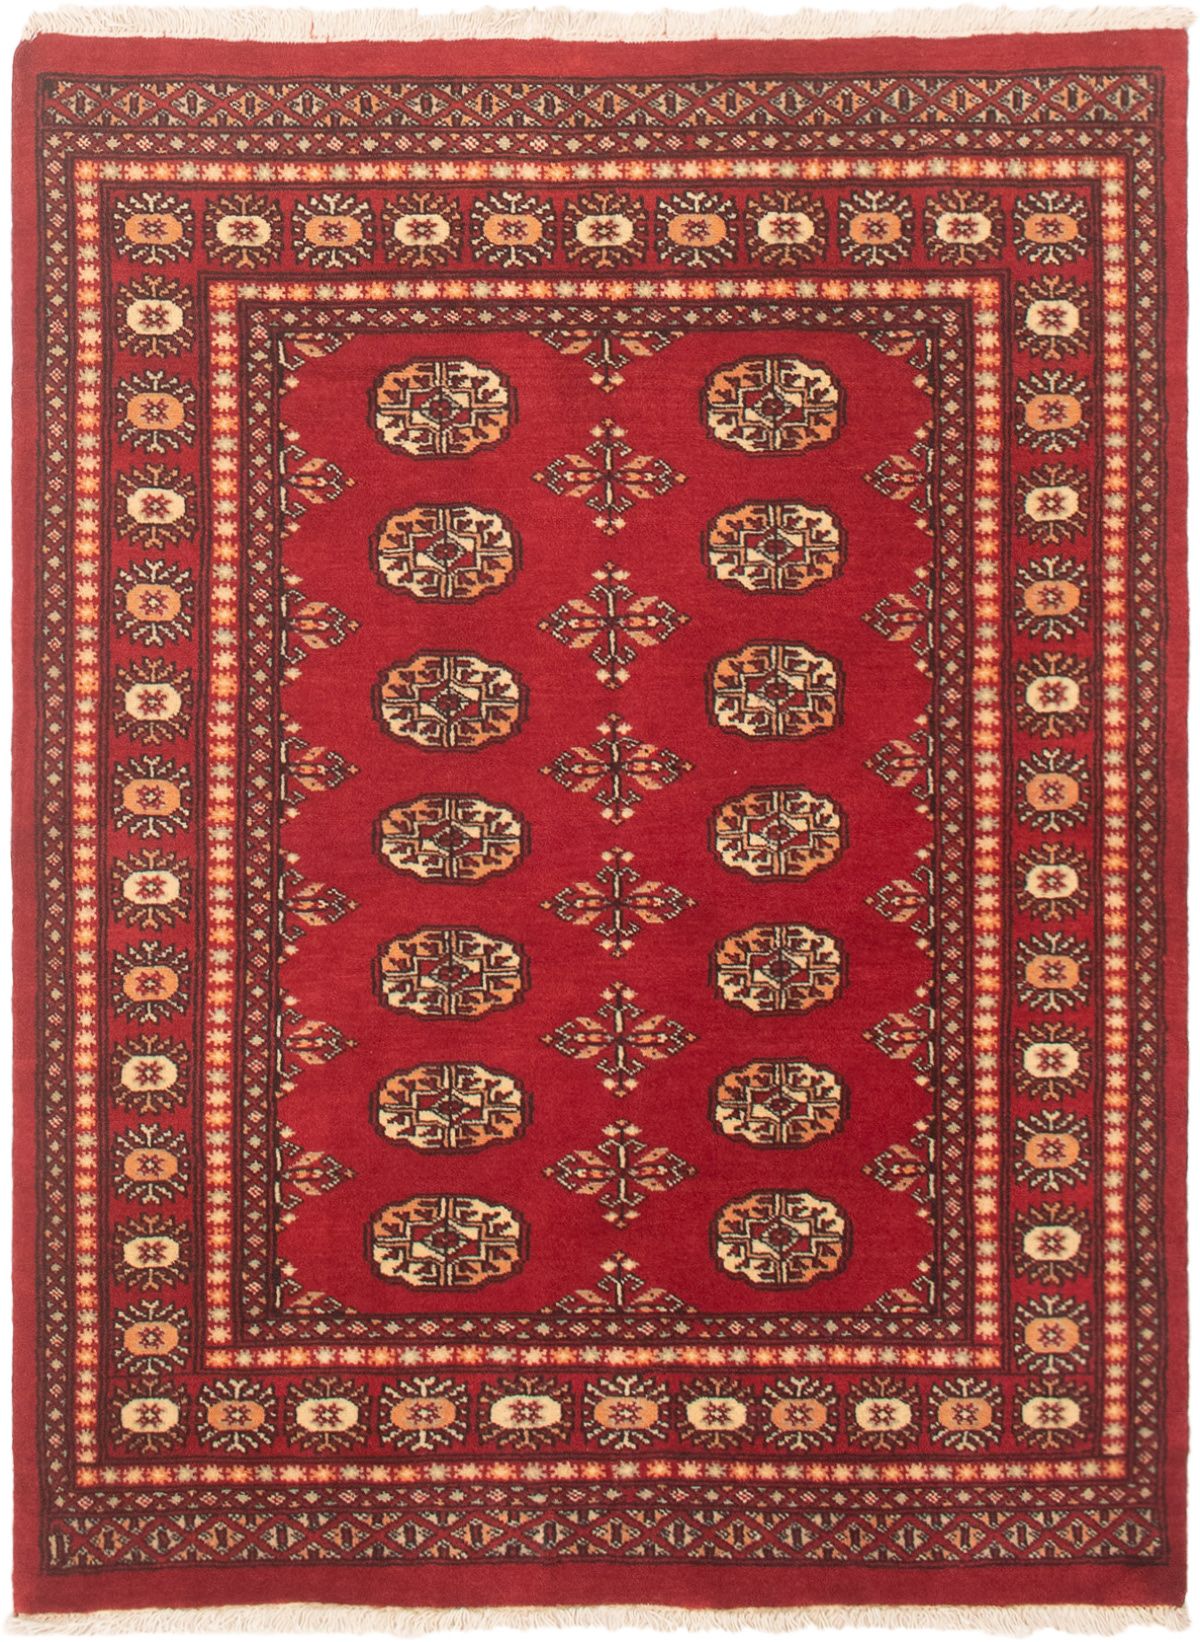 Hand-knotted Finest Peshawar Bokhara Red Wool Rug 4'0" x 5'5" Size: 4'0" x 5'5"  